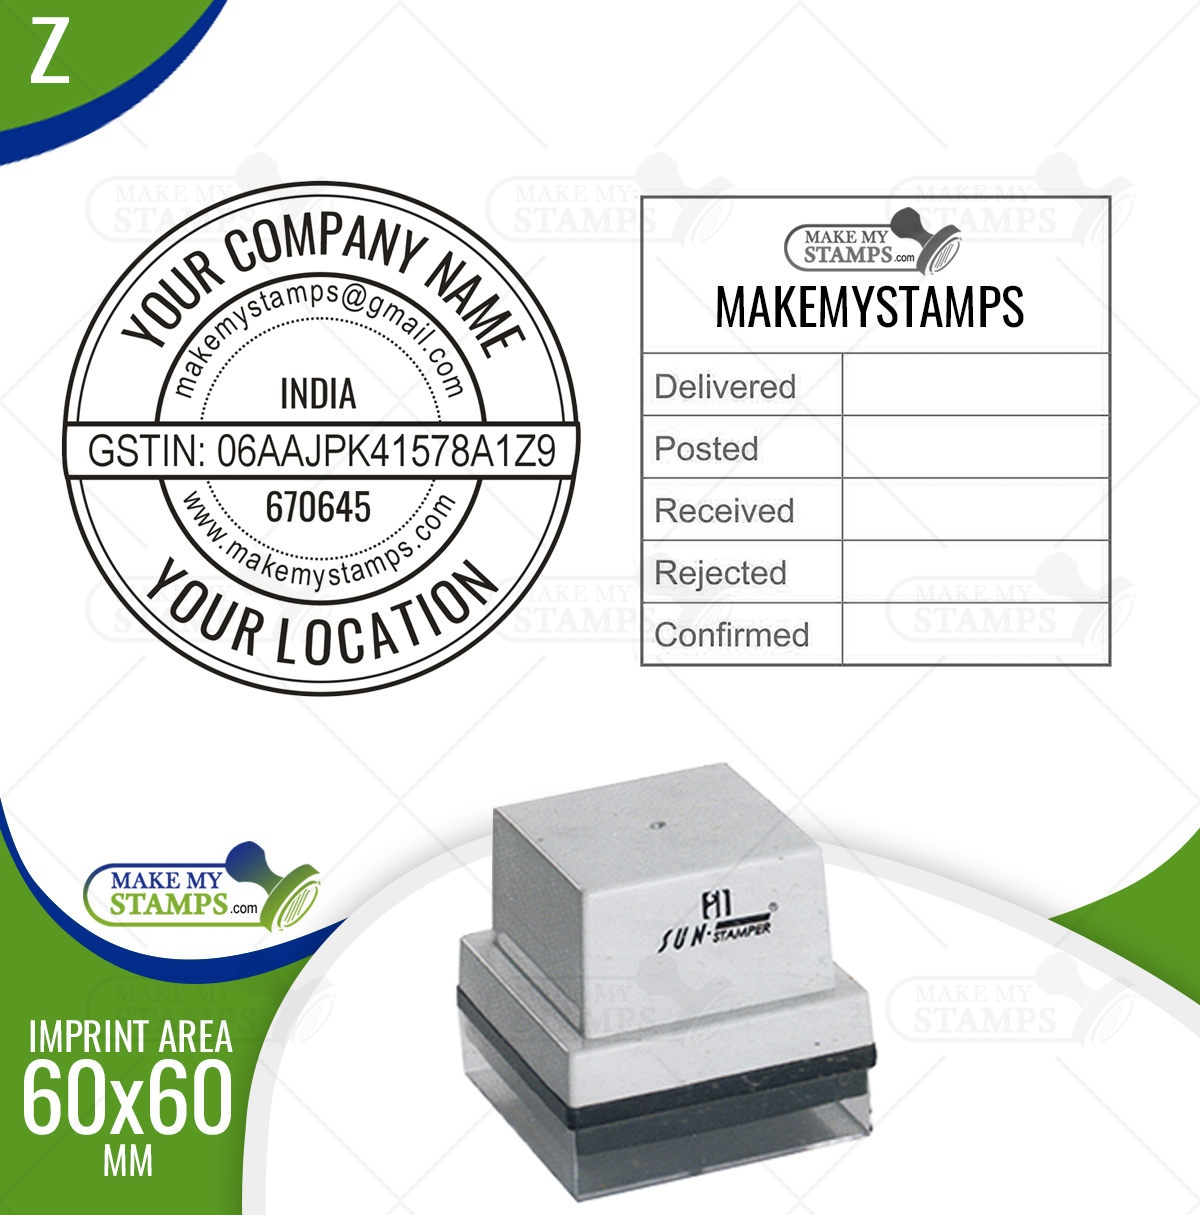 Rubber Stamp Maker near Me. Rubber Stamp Maker near Me, by Stamp Online